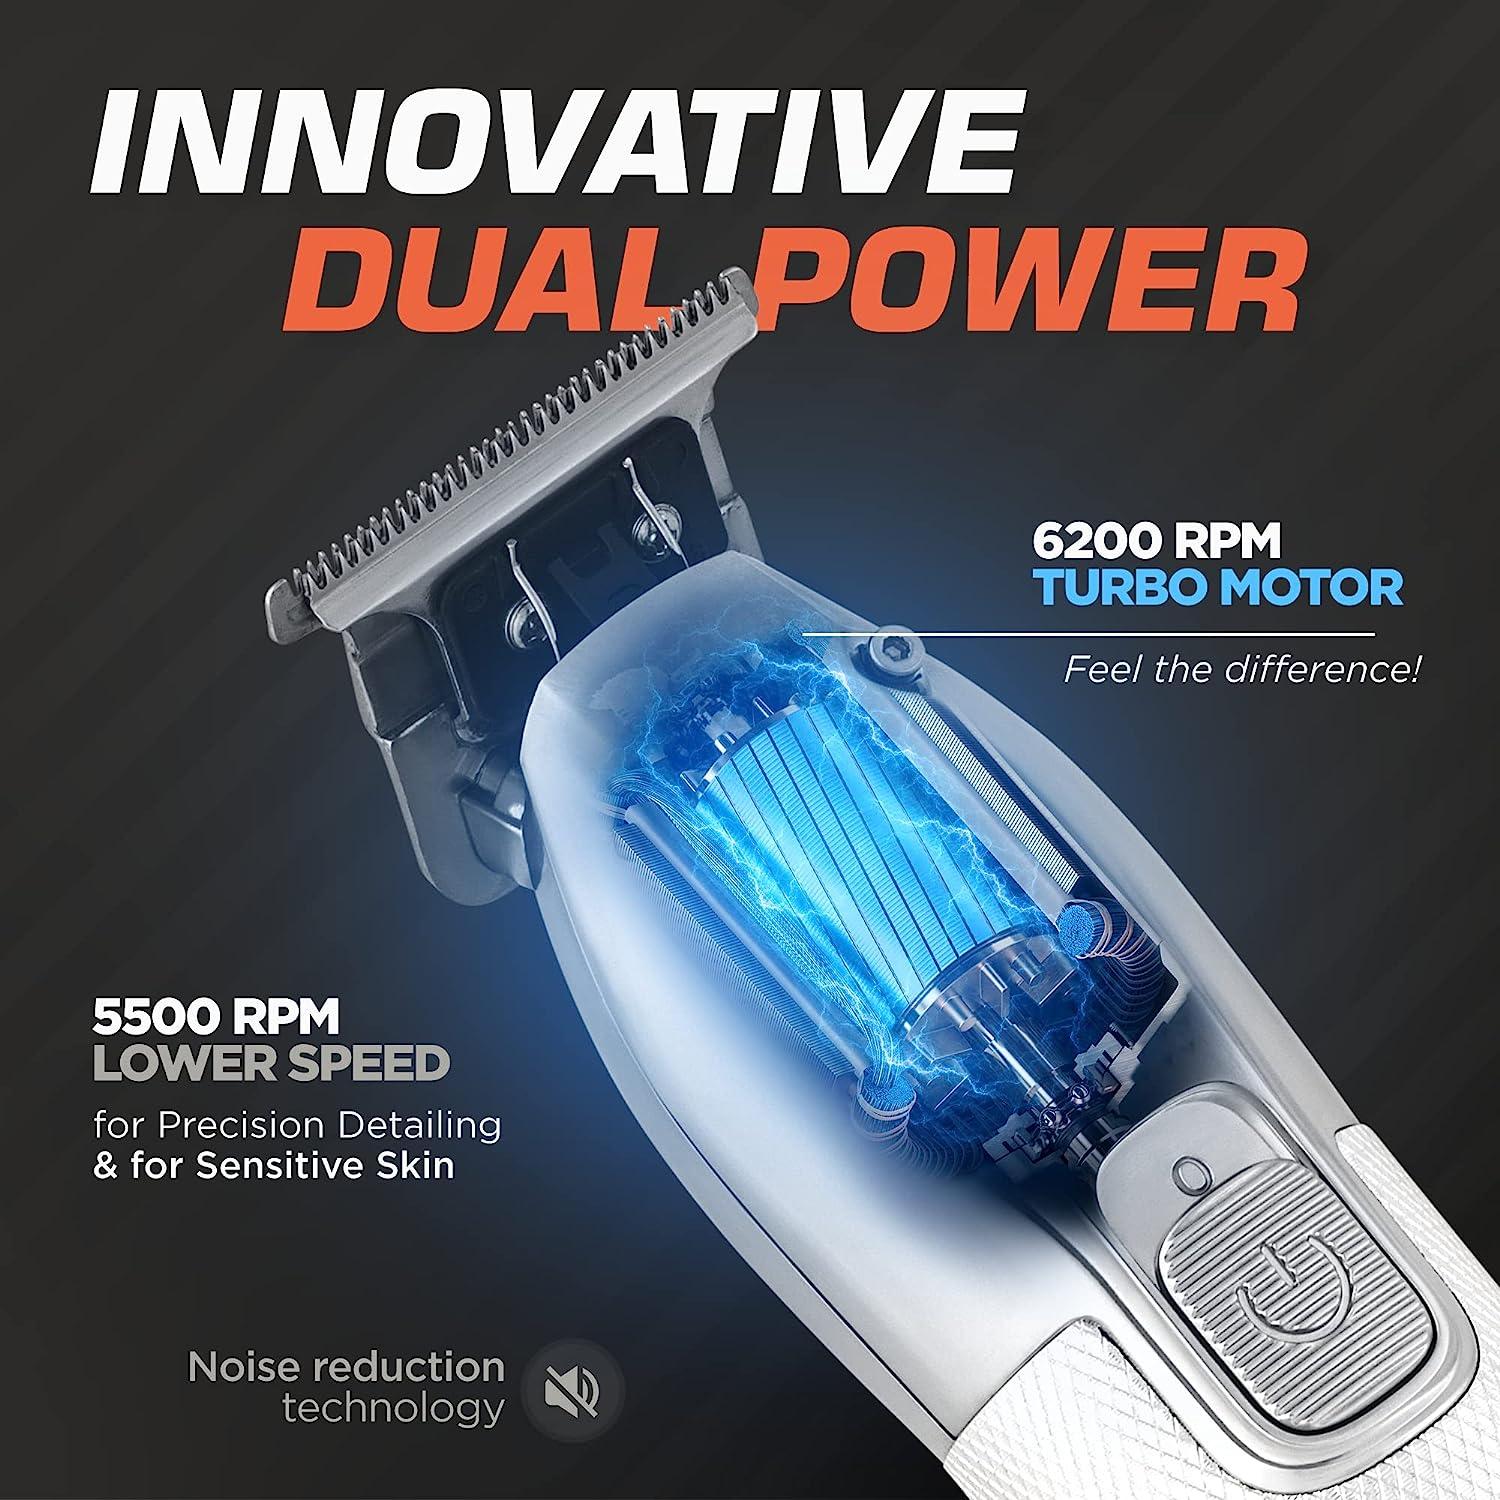 Cabello, for Cutting, Clippers Kit Haircut with Power Fagaci Hair Turbo Cutting, Clippers Set, Barber Men Precise for Set Clippers Hair Professional Cordless and Trimmers Cortar Hair de Maquina Barber